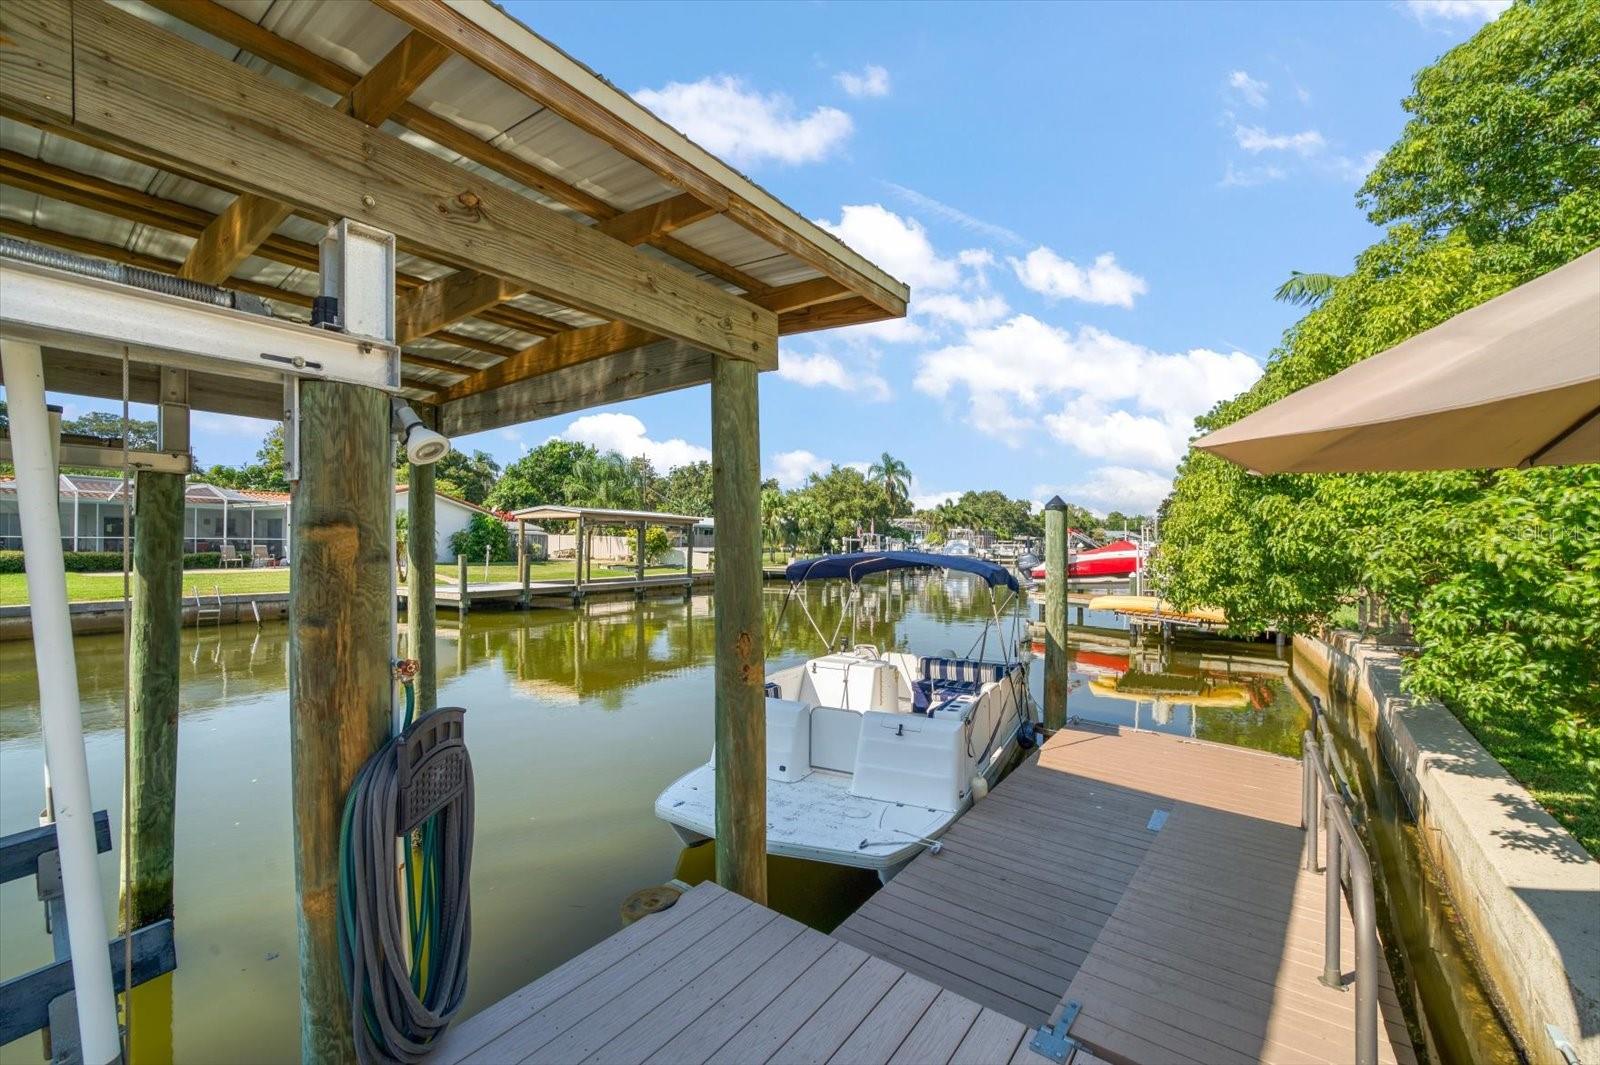 Dock with electric and water, composite decking, protective boat house..exceptional set up for boaters.